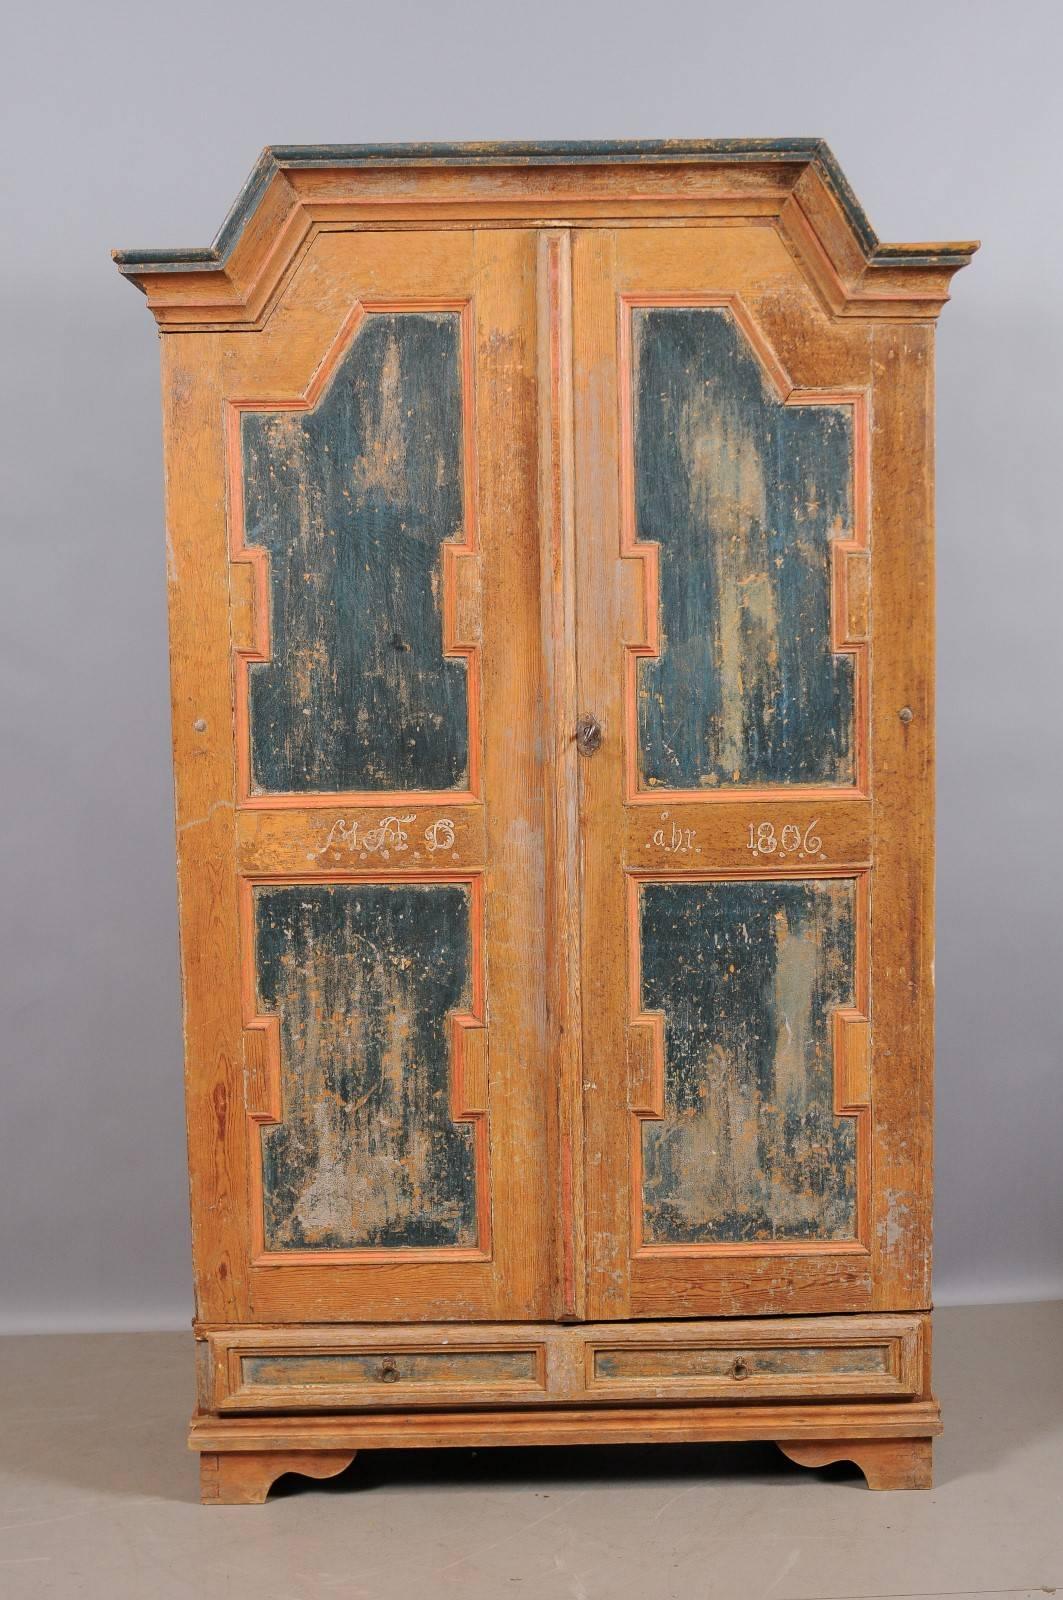 Swedish, early 19th century painted armoire in terracotta/rust and blue with lower drawer.



